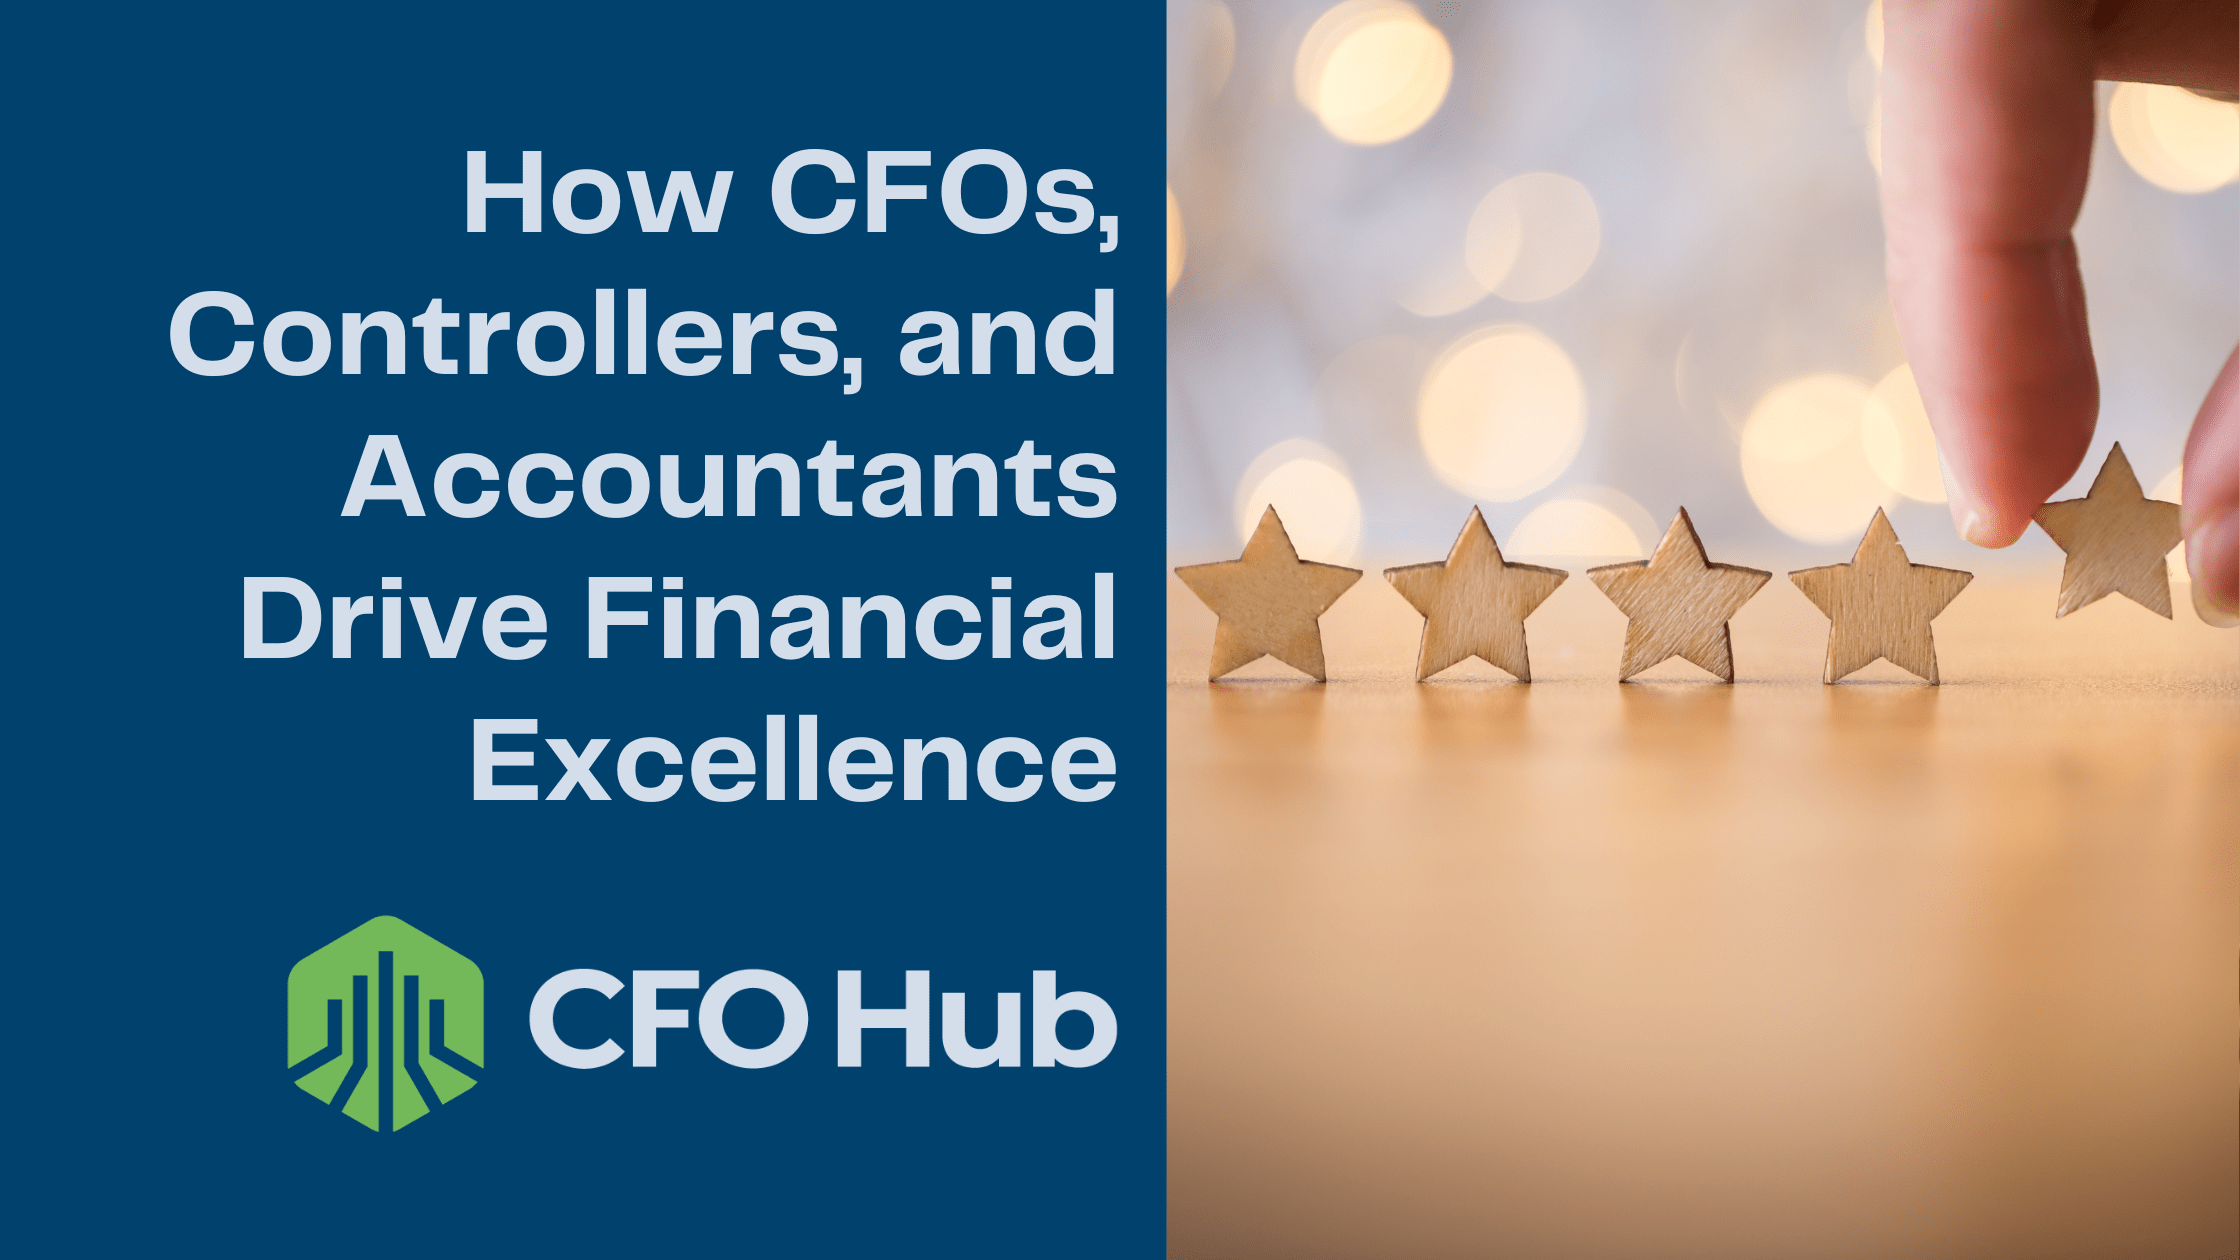 A hand places a fifth wooden star in a row of four on a light wooden surface. Text to the left reads, "How CFOs, Controllers, and Accountants Drive Financial Excellence." Below the text is the CFO Hub logo, featuring a green and blue emblem.